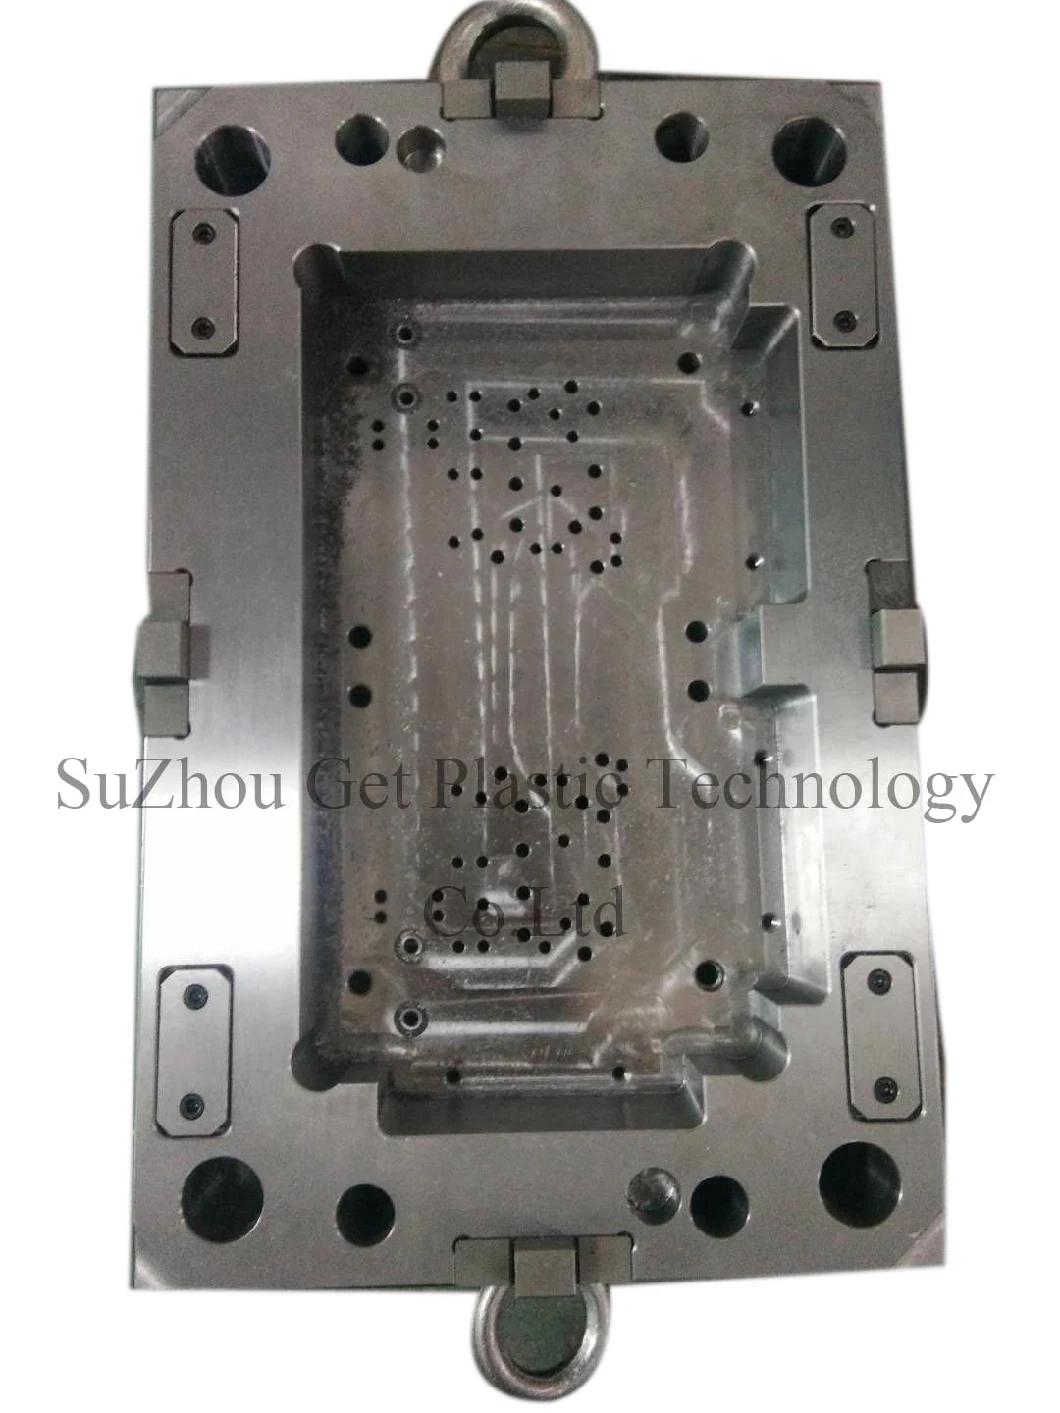 Plastic Product Mold Injection in Plastic Factory